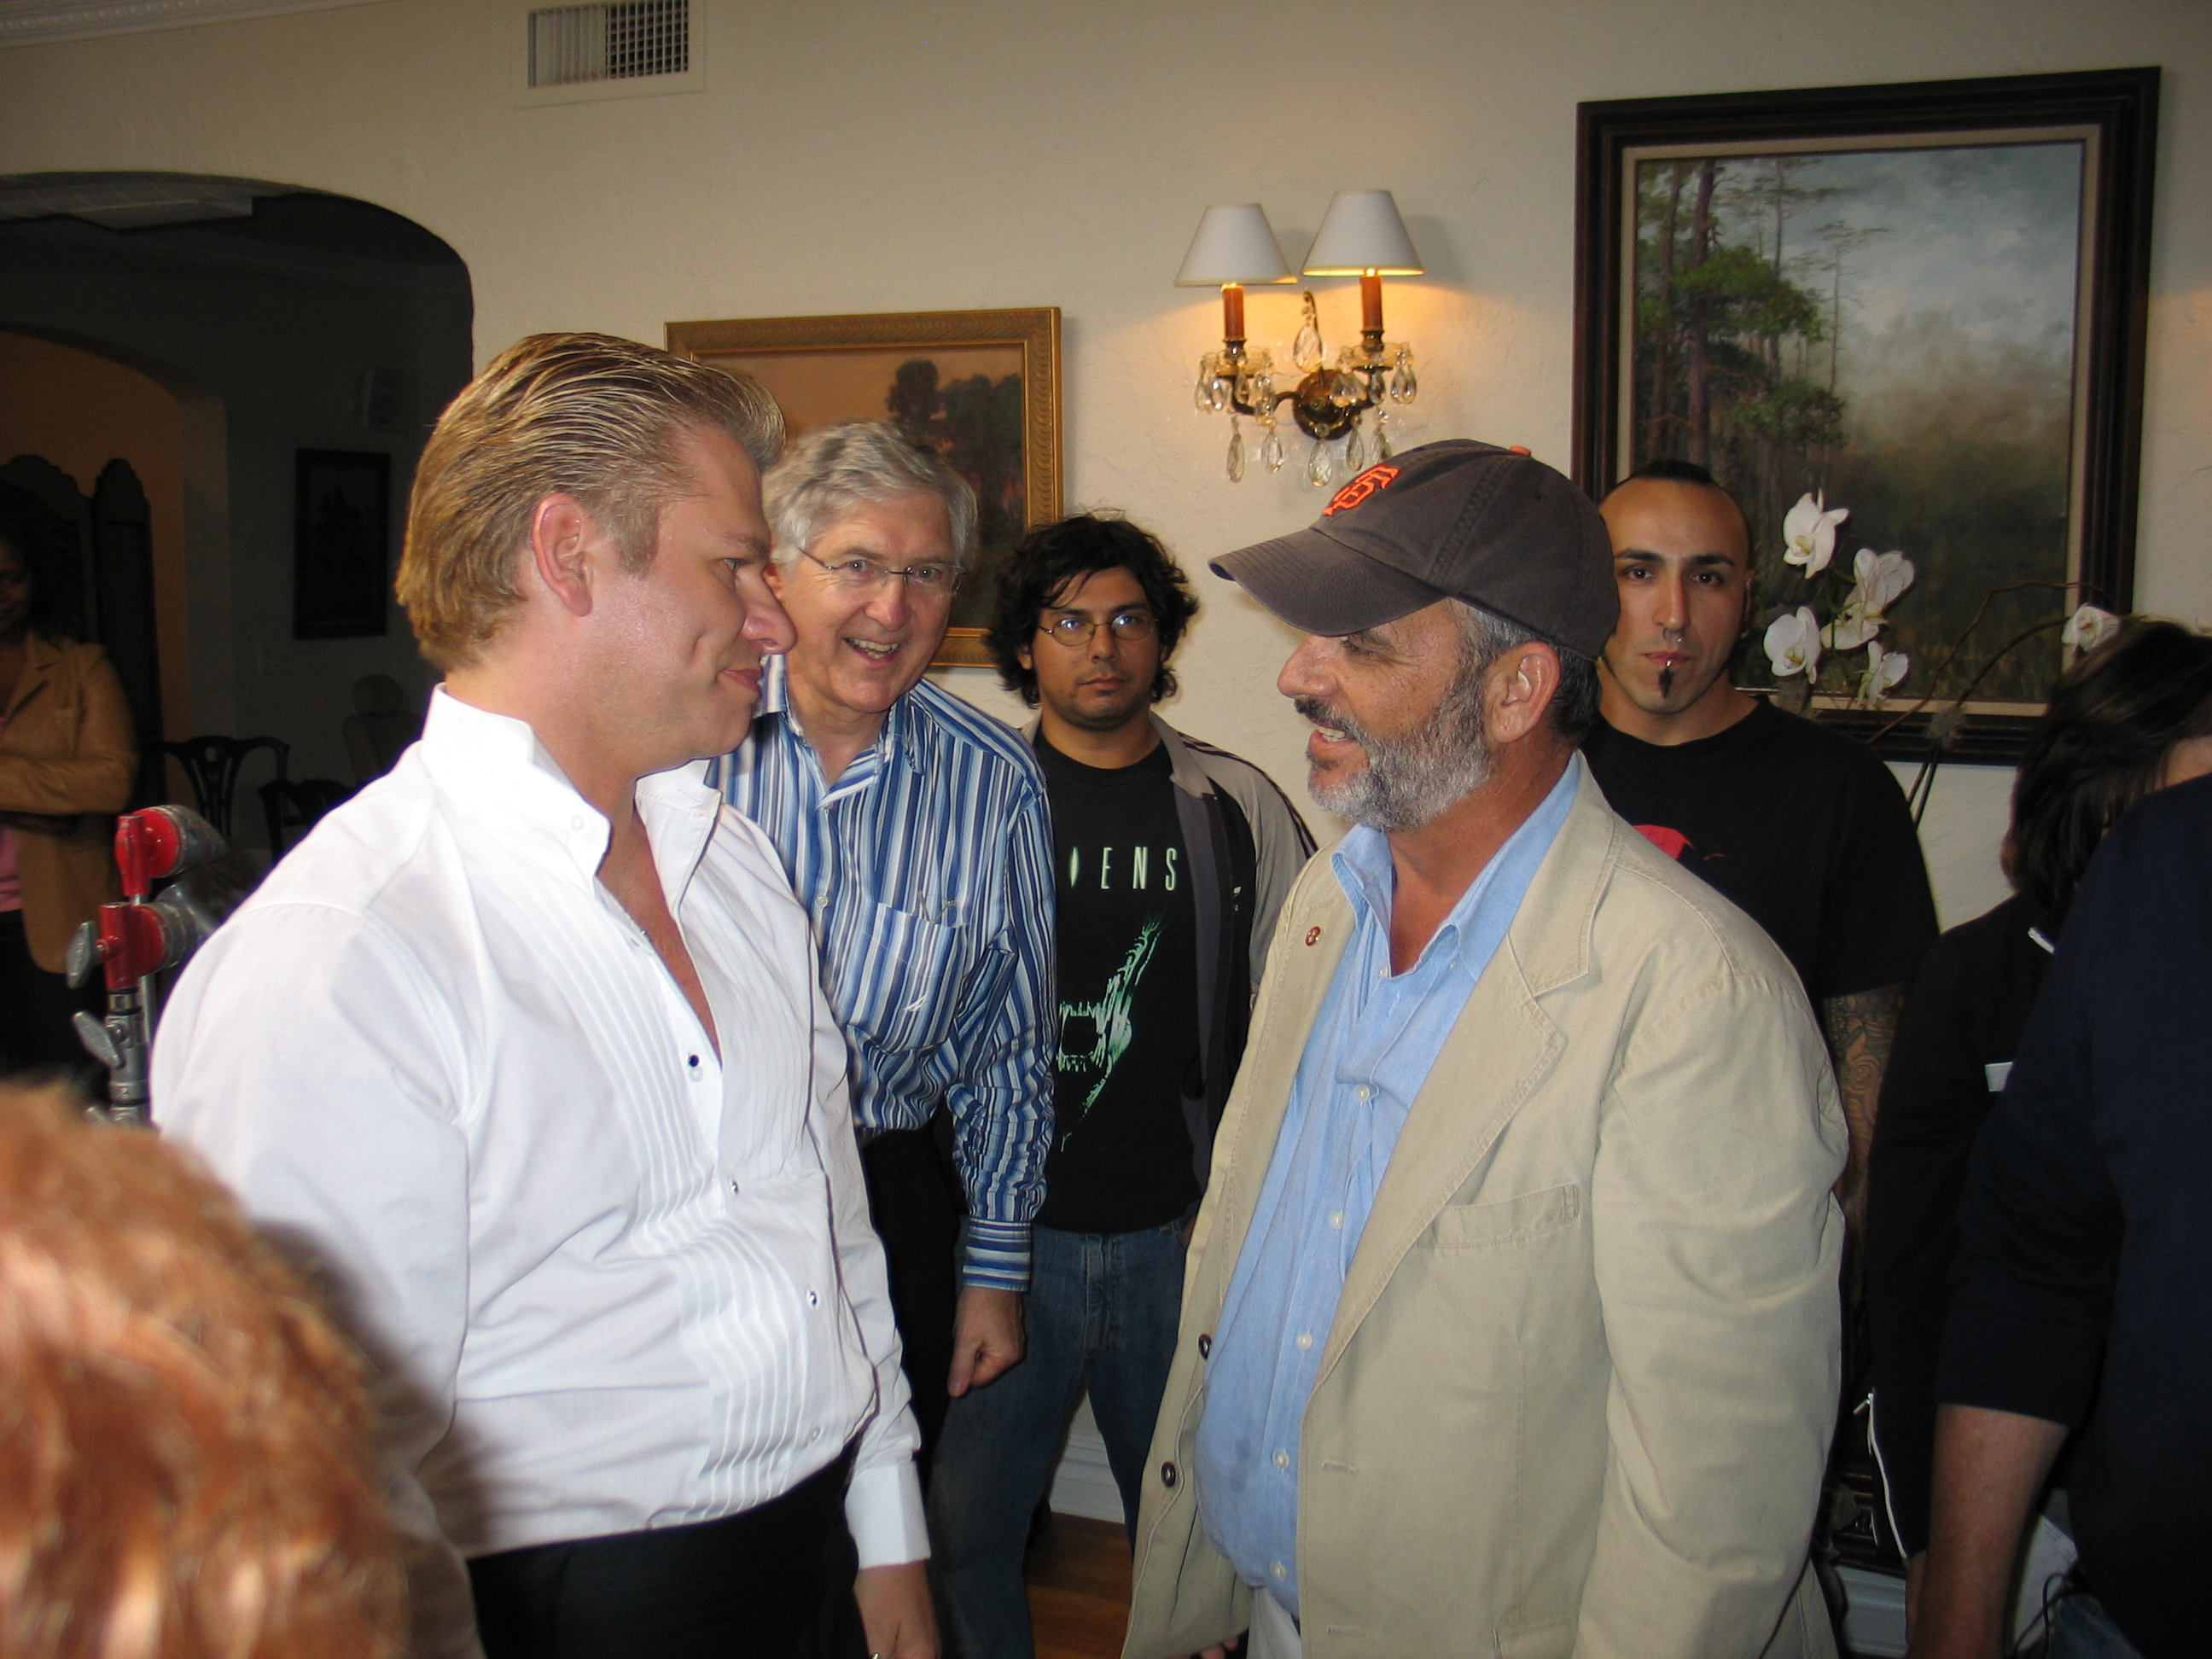 Mike Madden on location with Todd Sherry and the crew of Hiding Victoria 2007